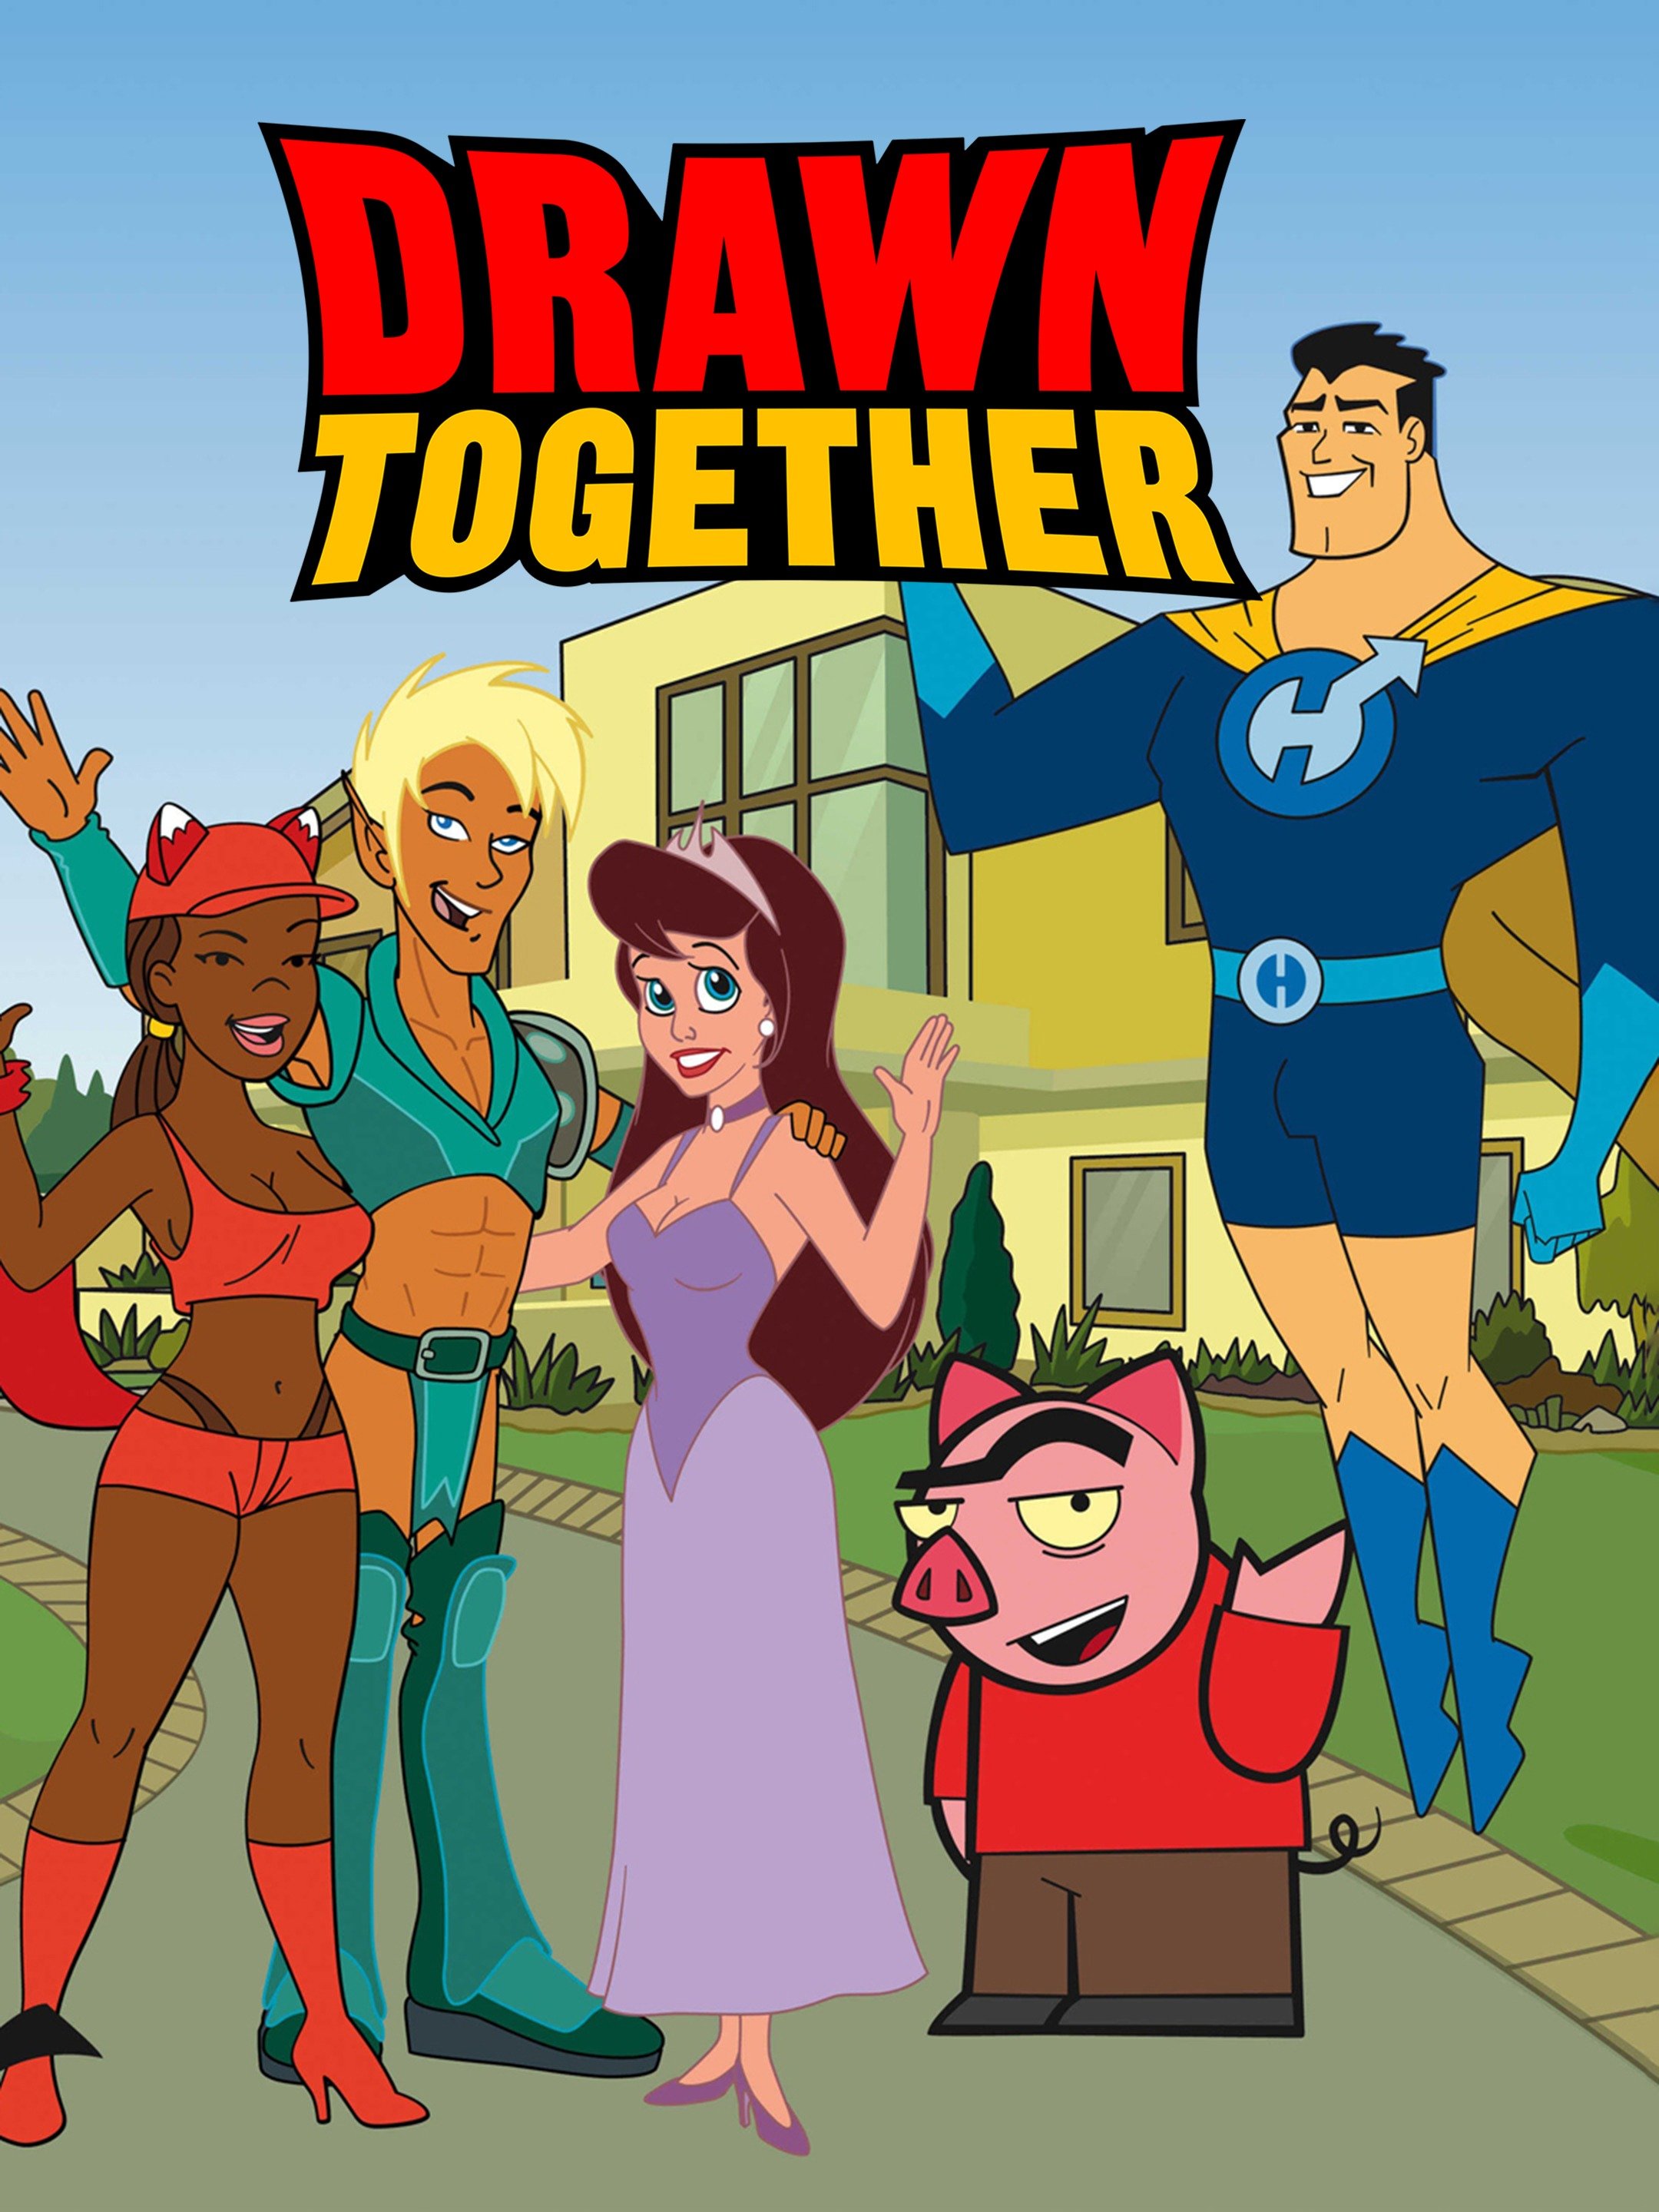 Drawn Together - Rotten Tomatoes